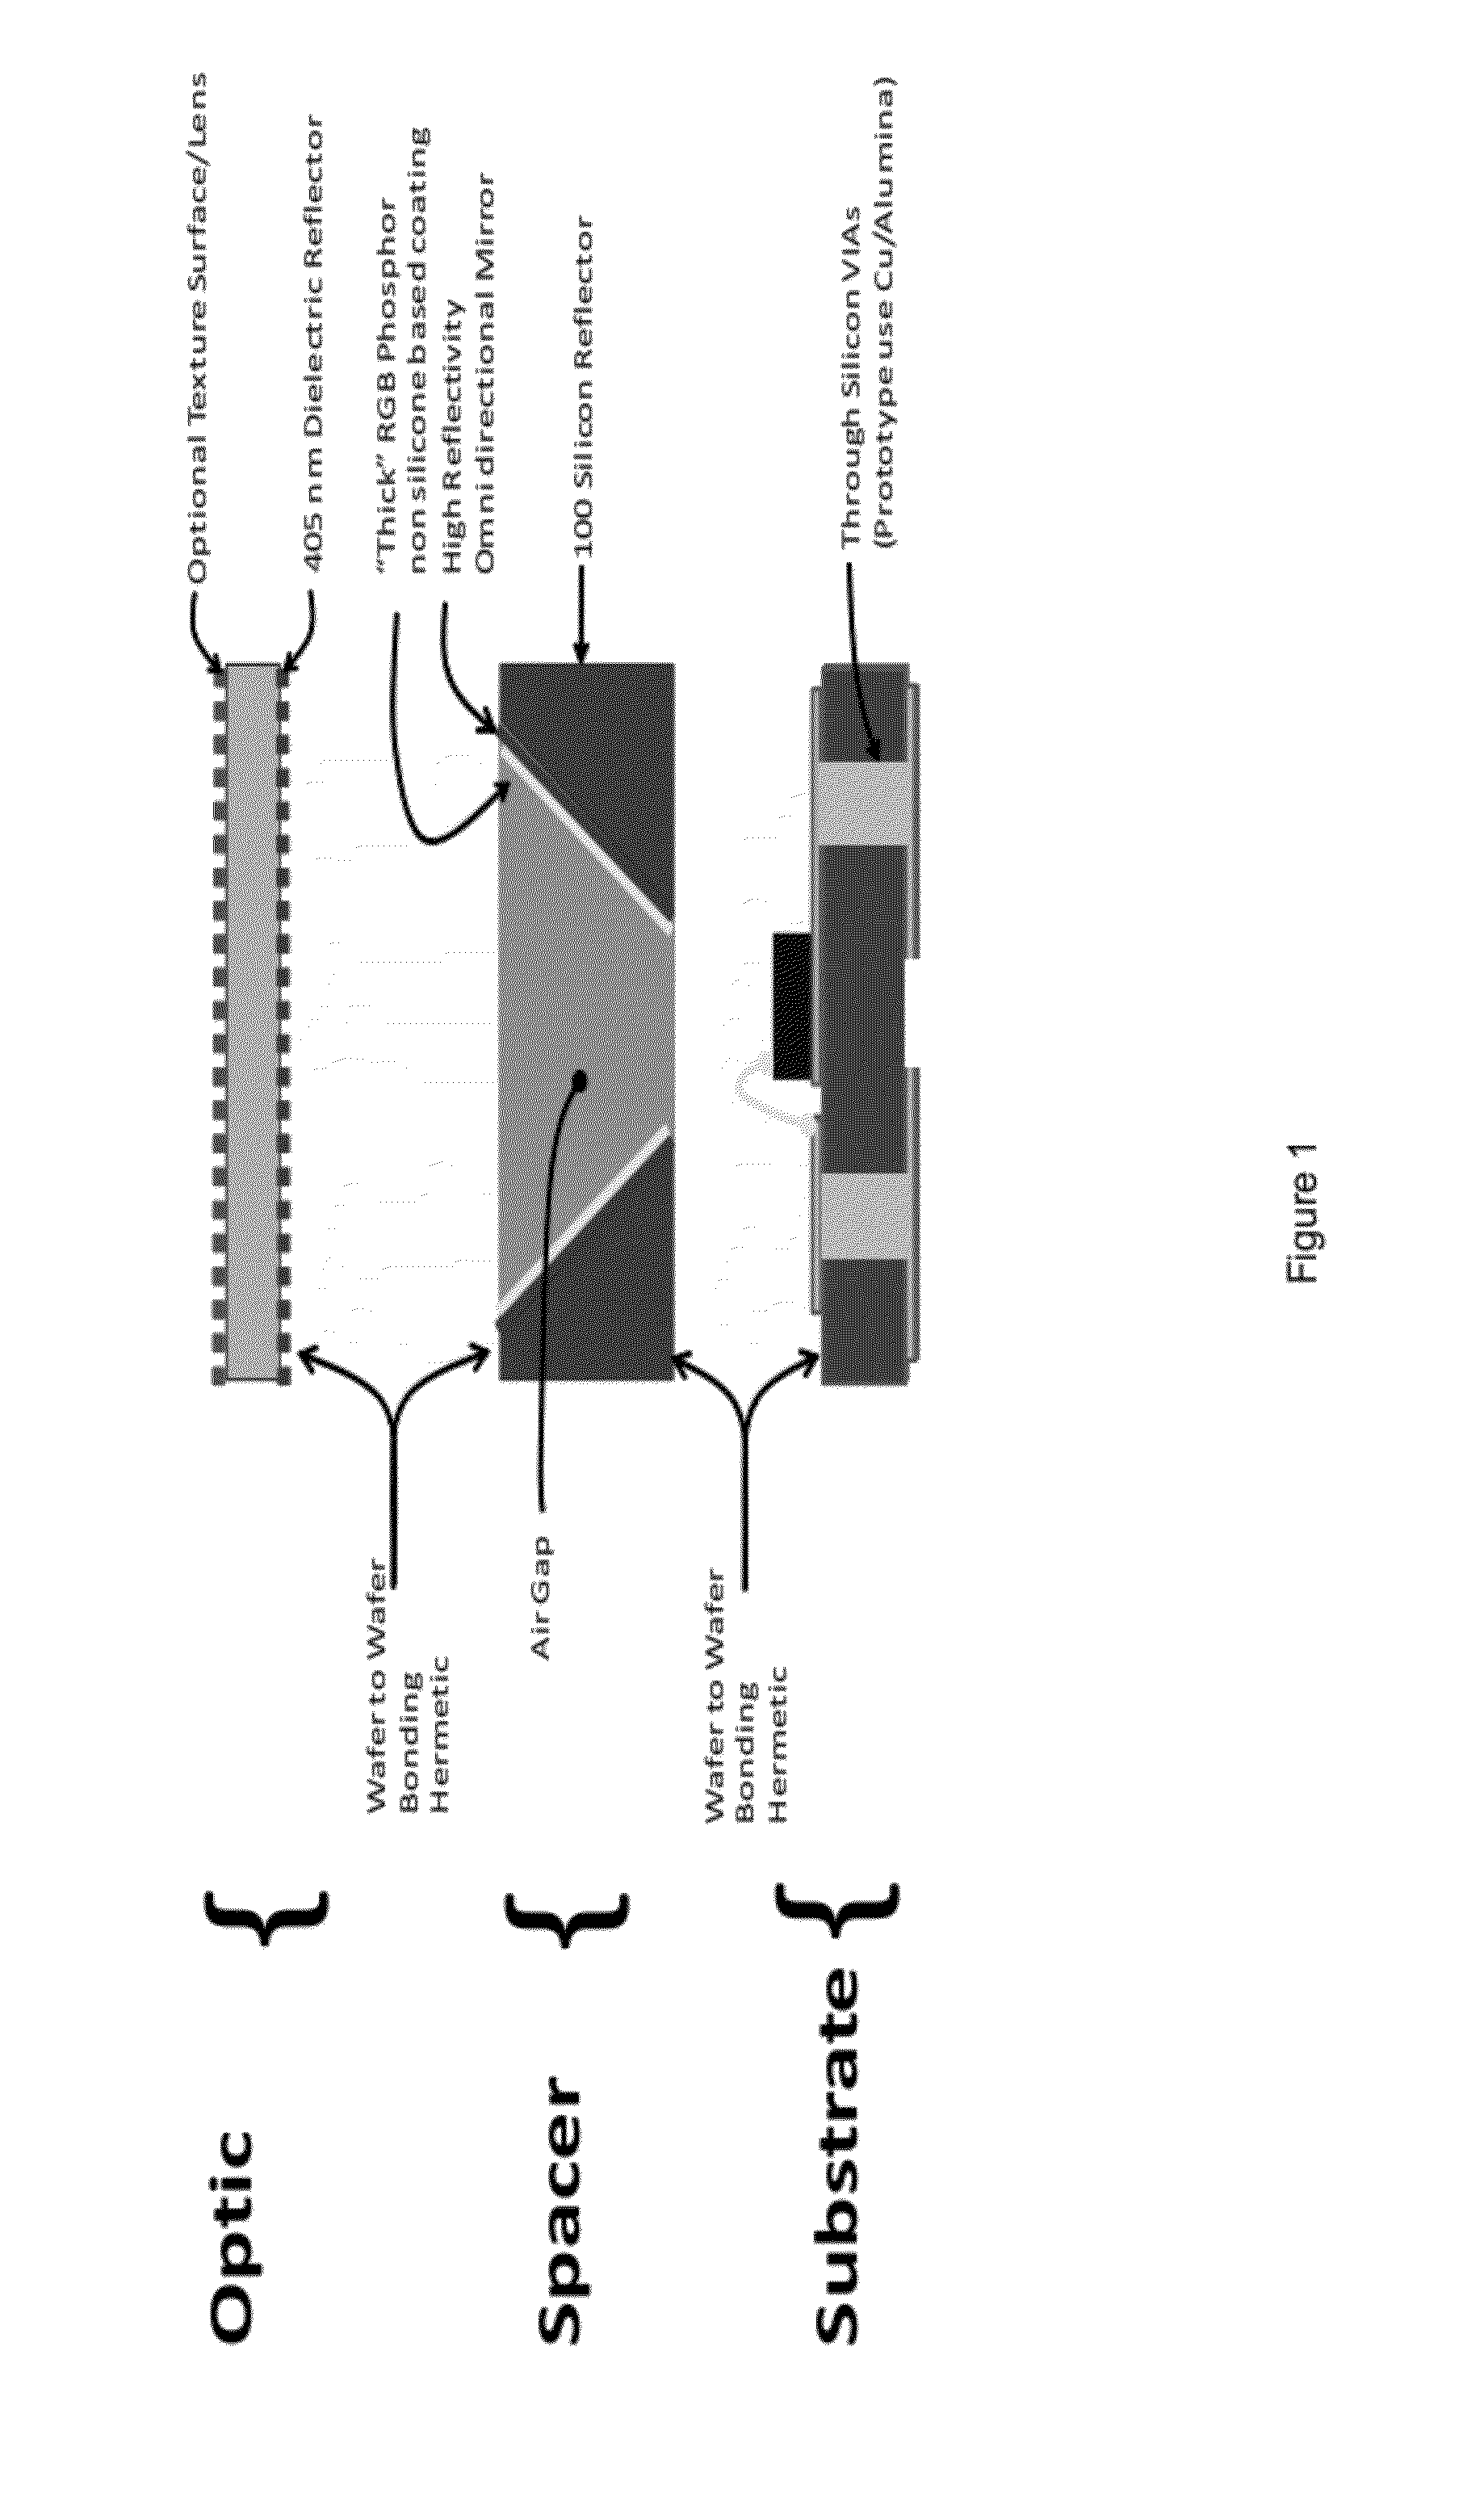 Optical device with wavelength selective reflector